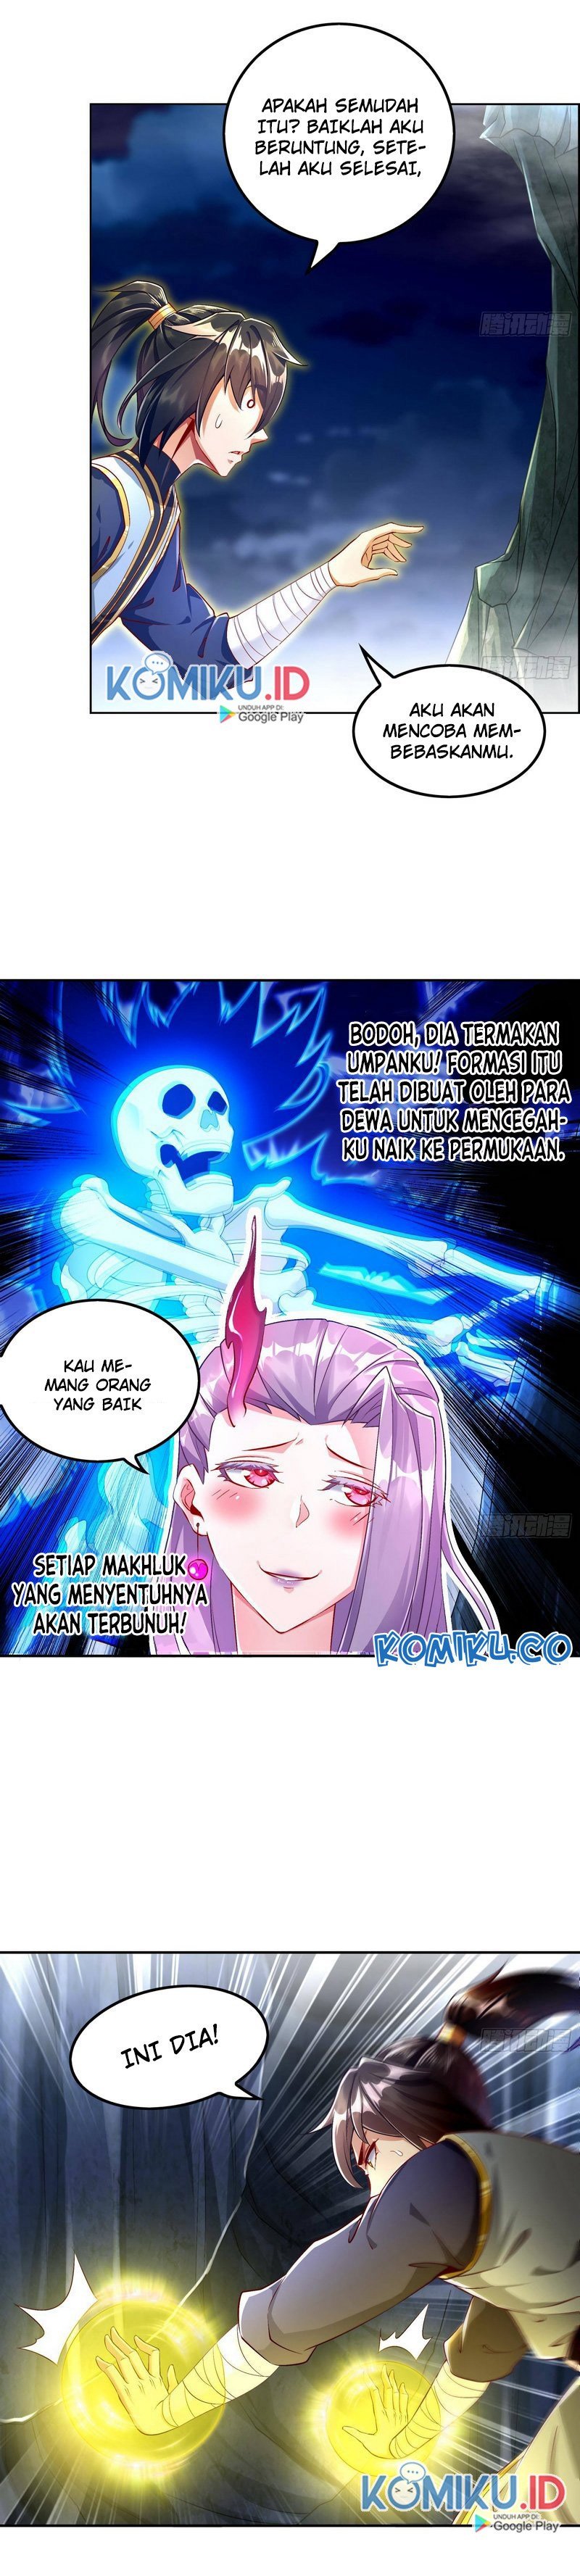 Rebirth of the Demon Reign (The Rebirth of the Demon God) Chapter 52